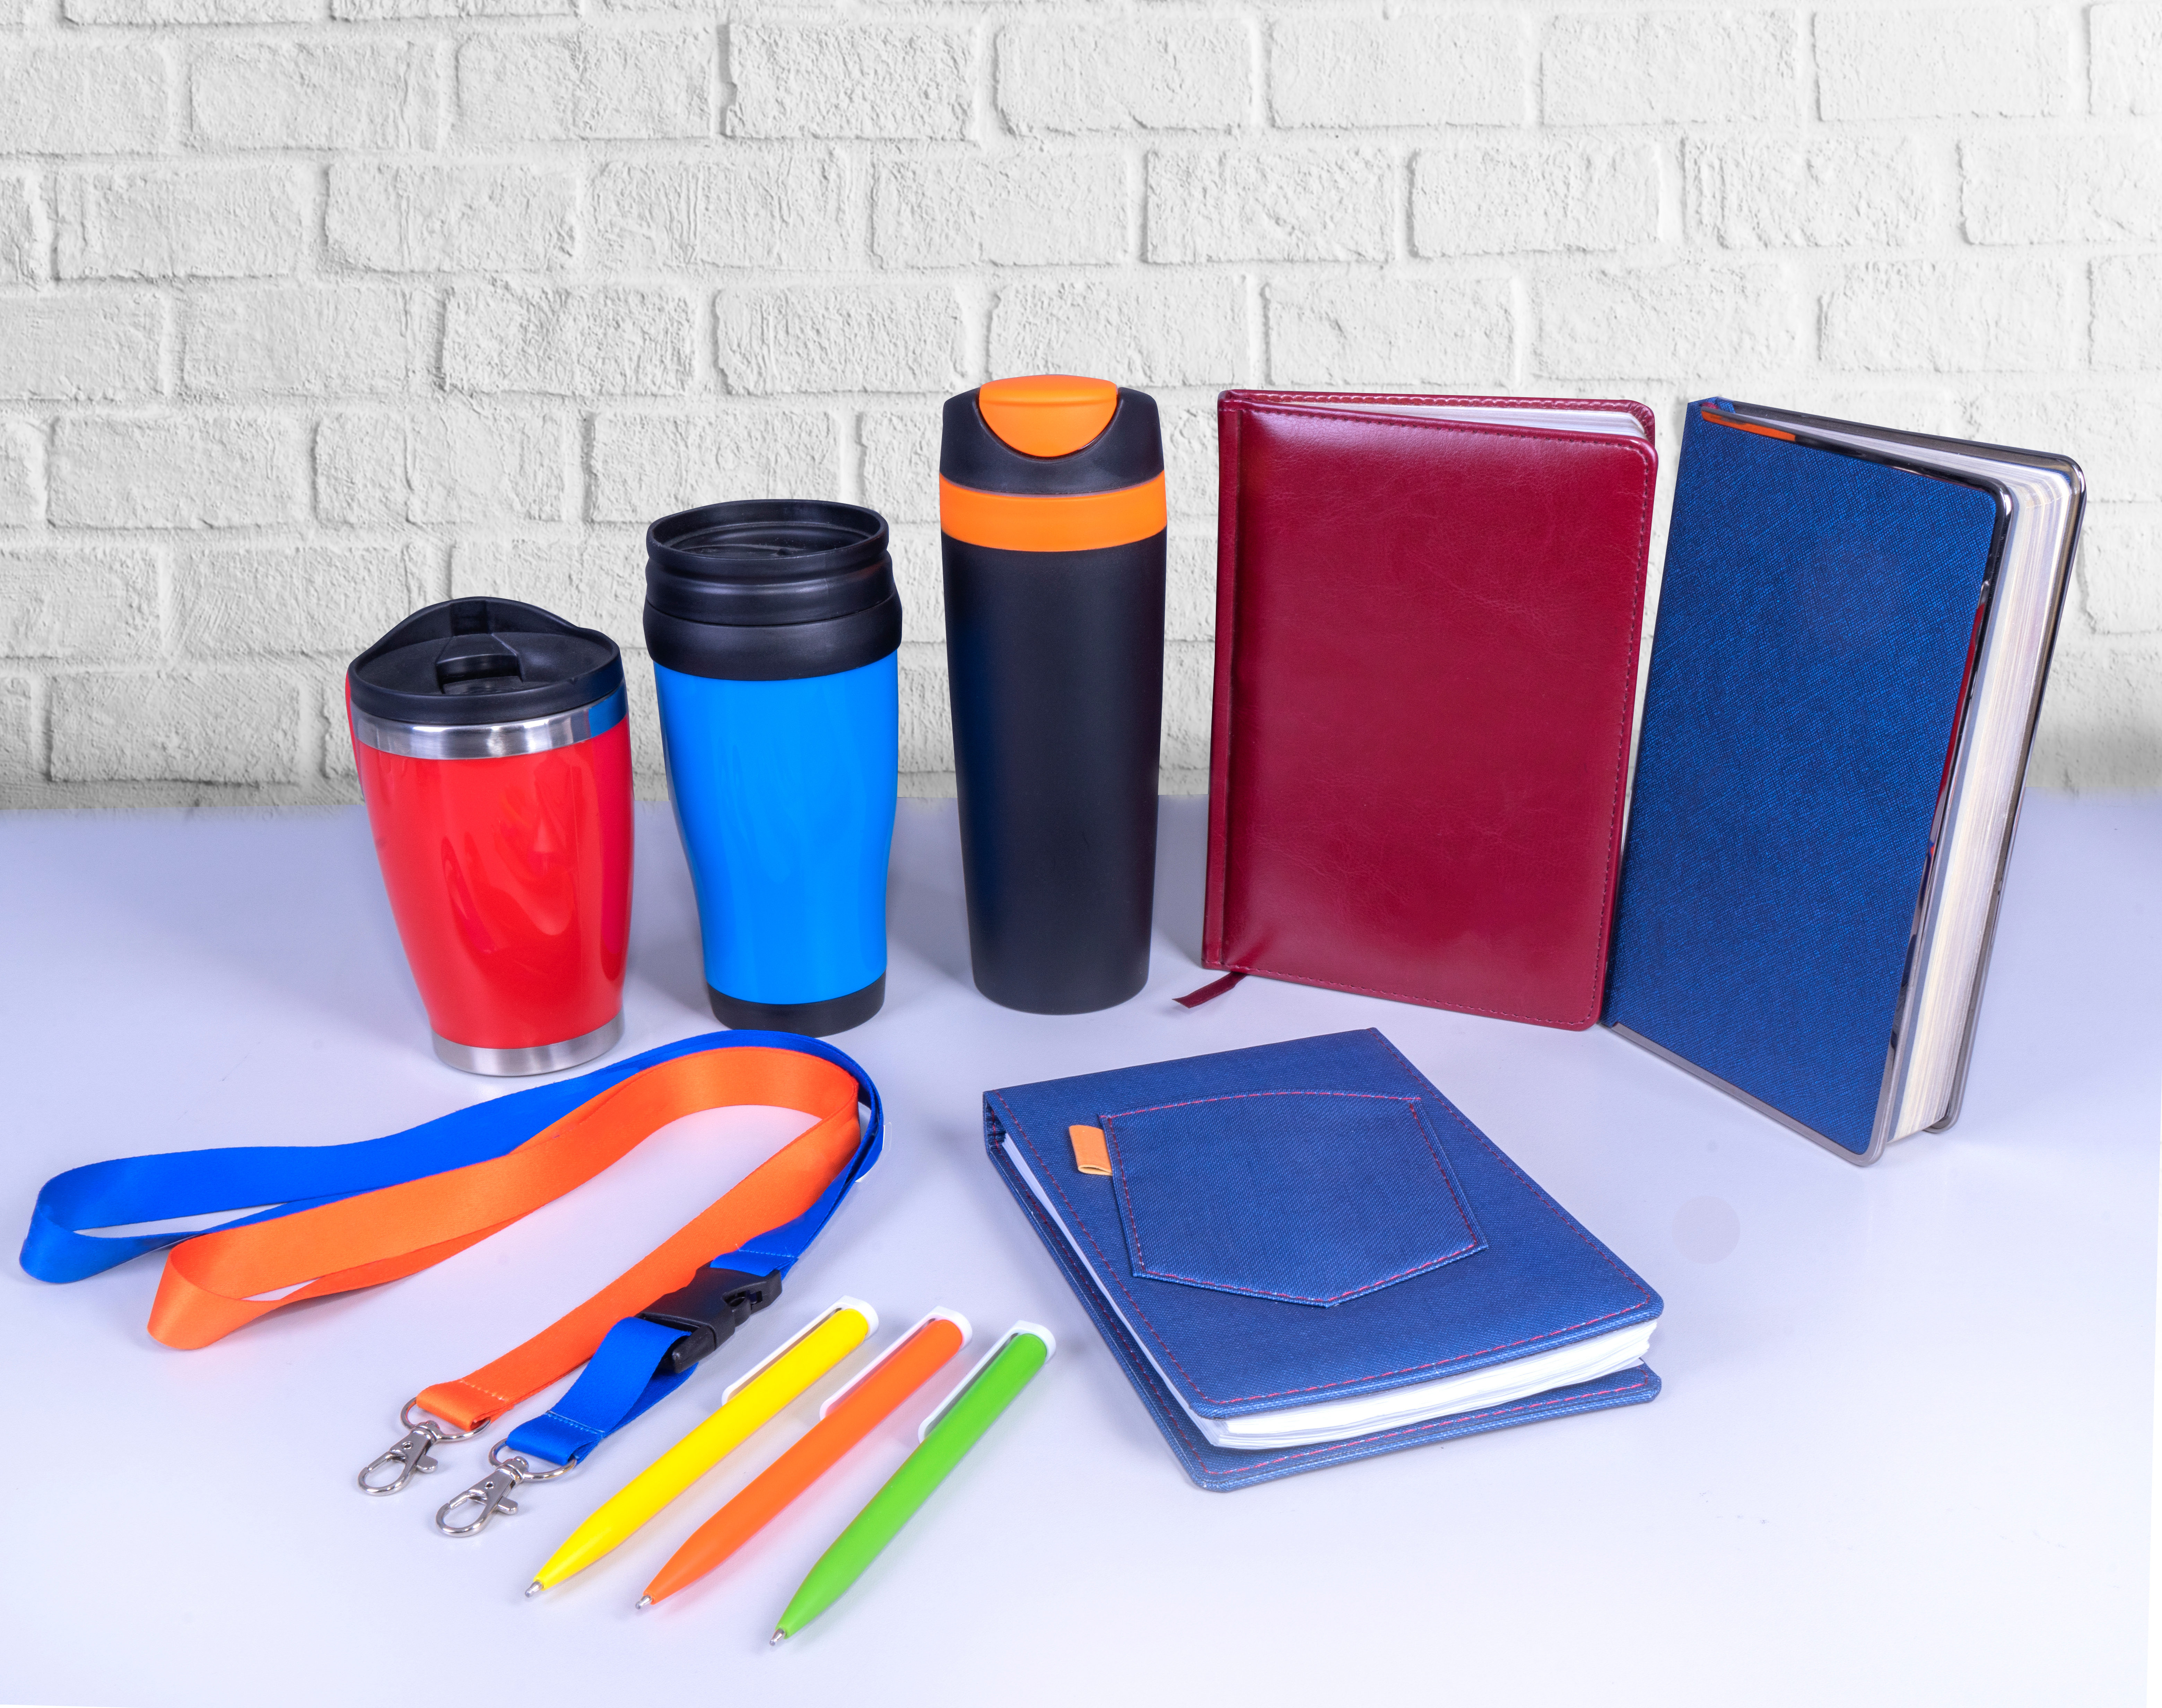 An image of blank products that can be branded and made into promotional items.